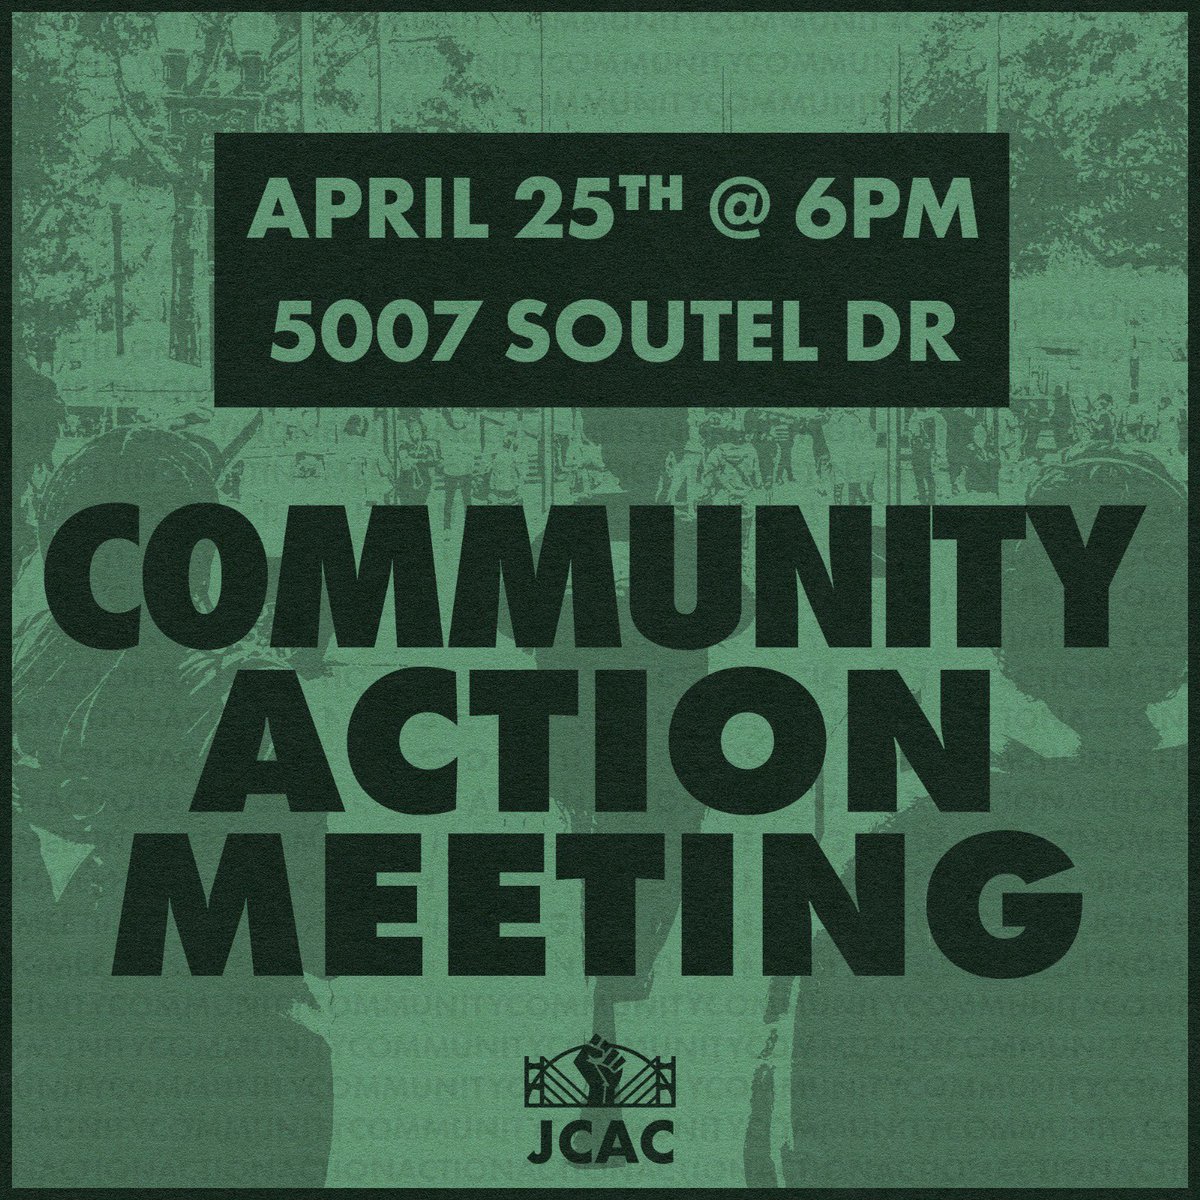 Spring is in full swing 🌸🌼 which means it’s a perfect time for you to bloom and get involved with JCAC! Join us for our next community action meeting‼️ Details below: 

Date: April 25

Time: 6pm

Place: 5007 Soutel Drive

Bring: a friend 👩🏽‍🤝‍👨🏿👩🏿‍🤝‍👩🏼👨🏾‍🤝‍👨🏿 and something to write with 📝